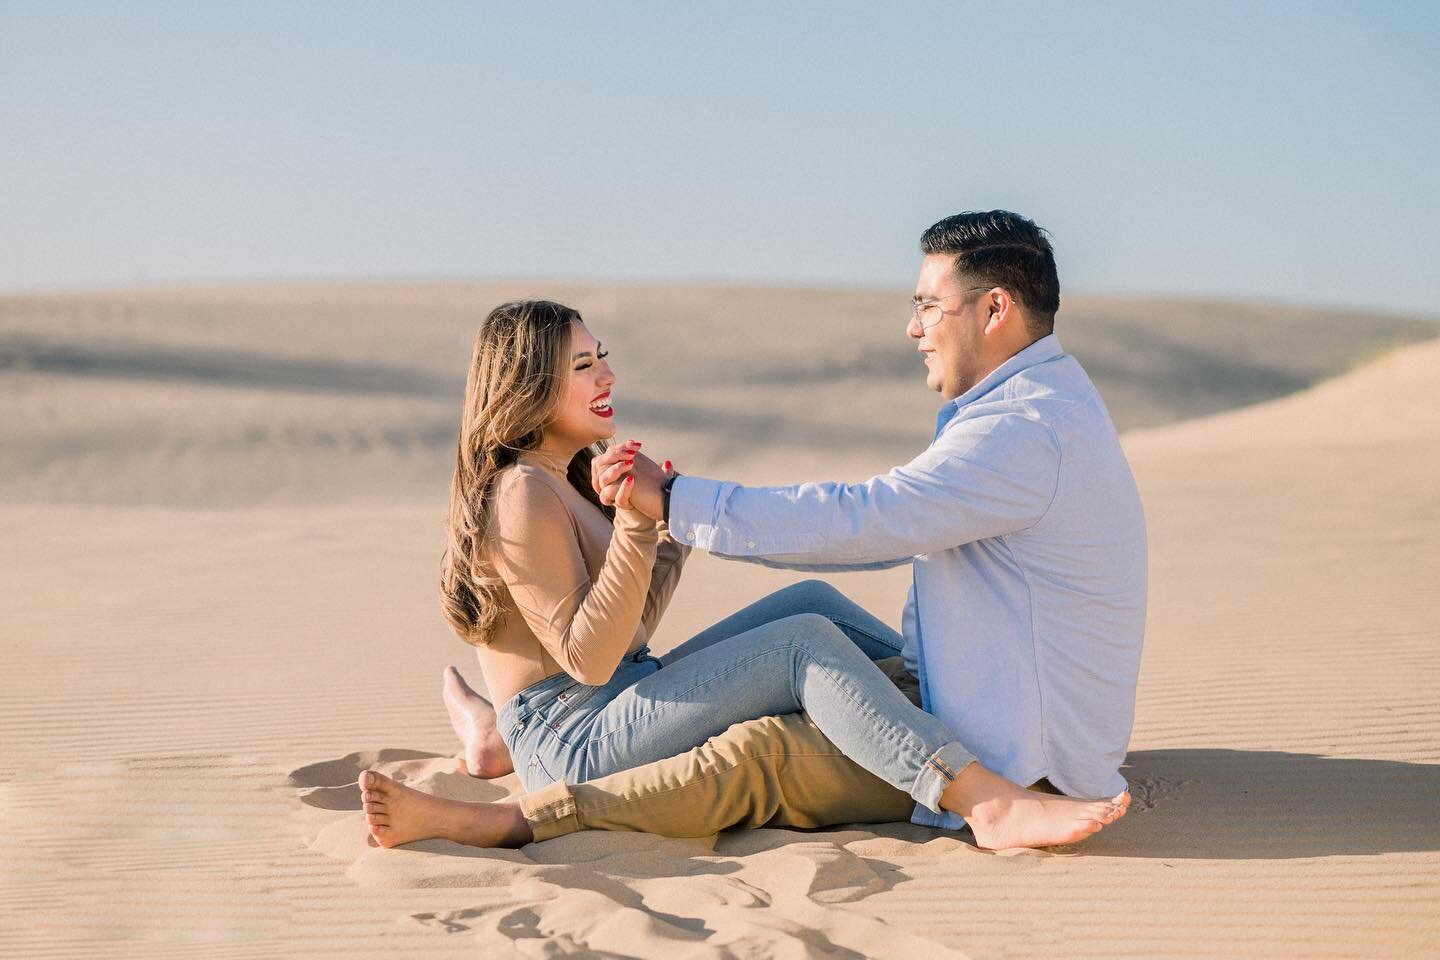 A little slow posting @adylenne_rs_ and @sweetwinepapi13 engagement session! Had soo much fun with these two running around the sand dunes!! It was an adventure to go up and come back down from them😅 Sorry Adi I lead you to the wrong way and made yo